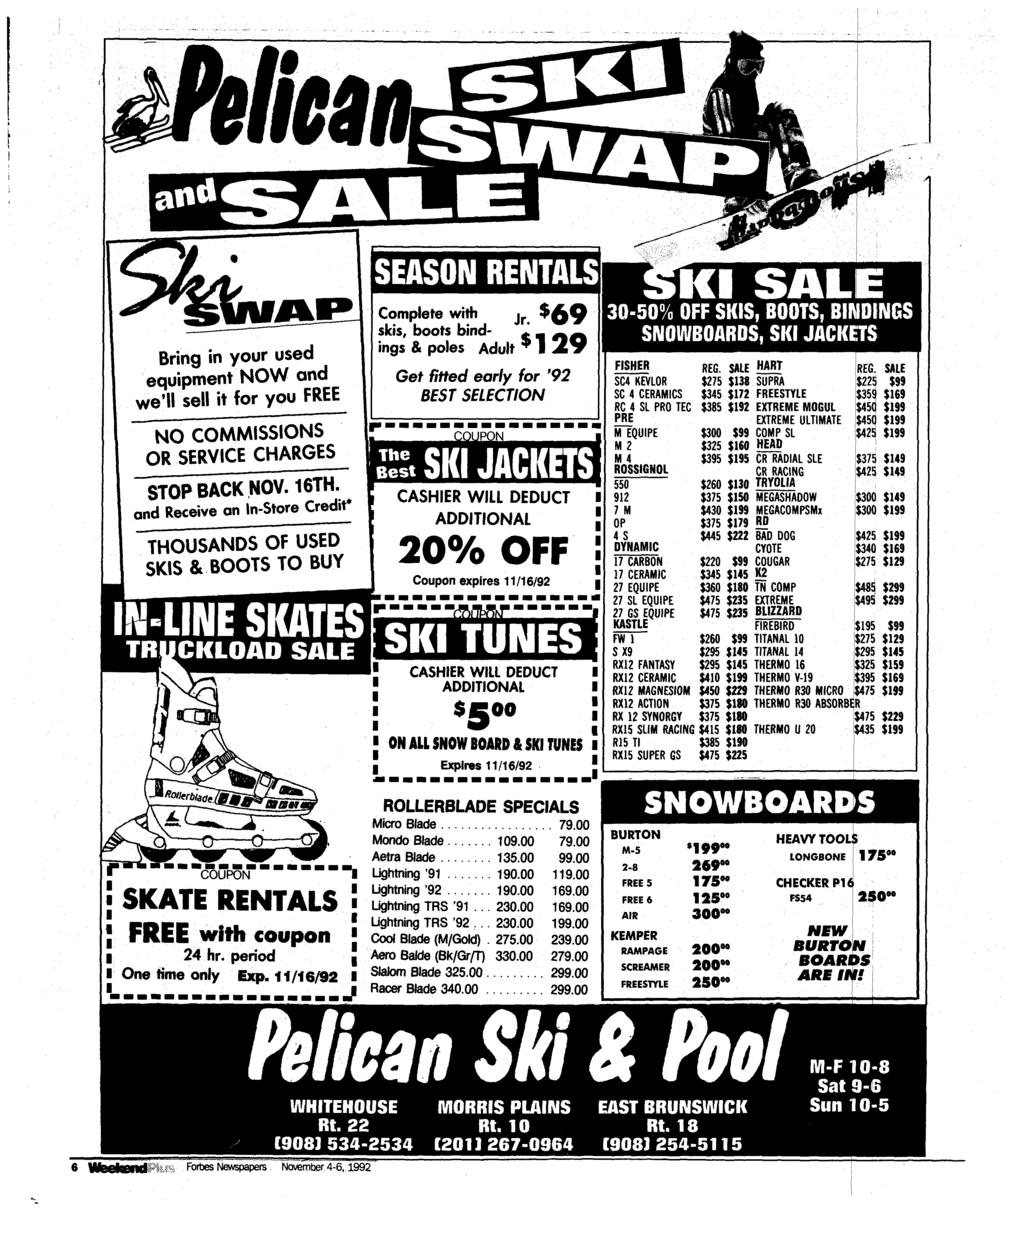 Bring in your used equipment NOW and we'll sell it for you FREE THOUSANDS OF USED SKIS & BOOTS TO BUY TRUCKLOAO SALE "couport " " SKATE RENTALS FREE with coupon 24 hr. period One time only Exp.